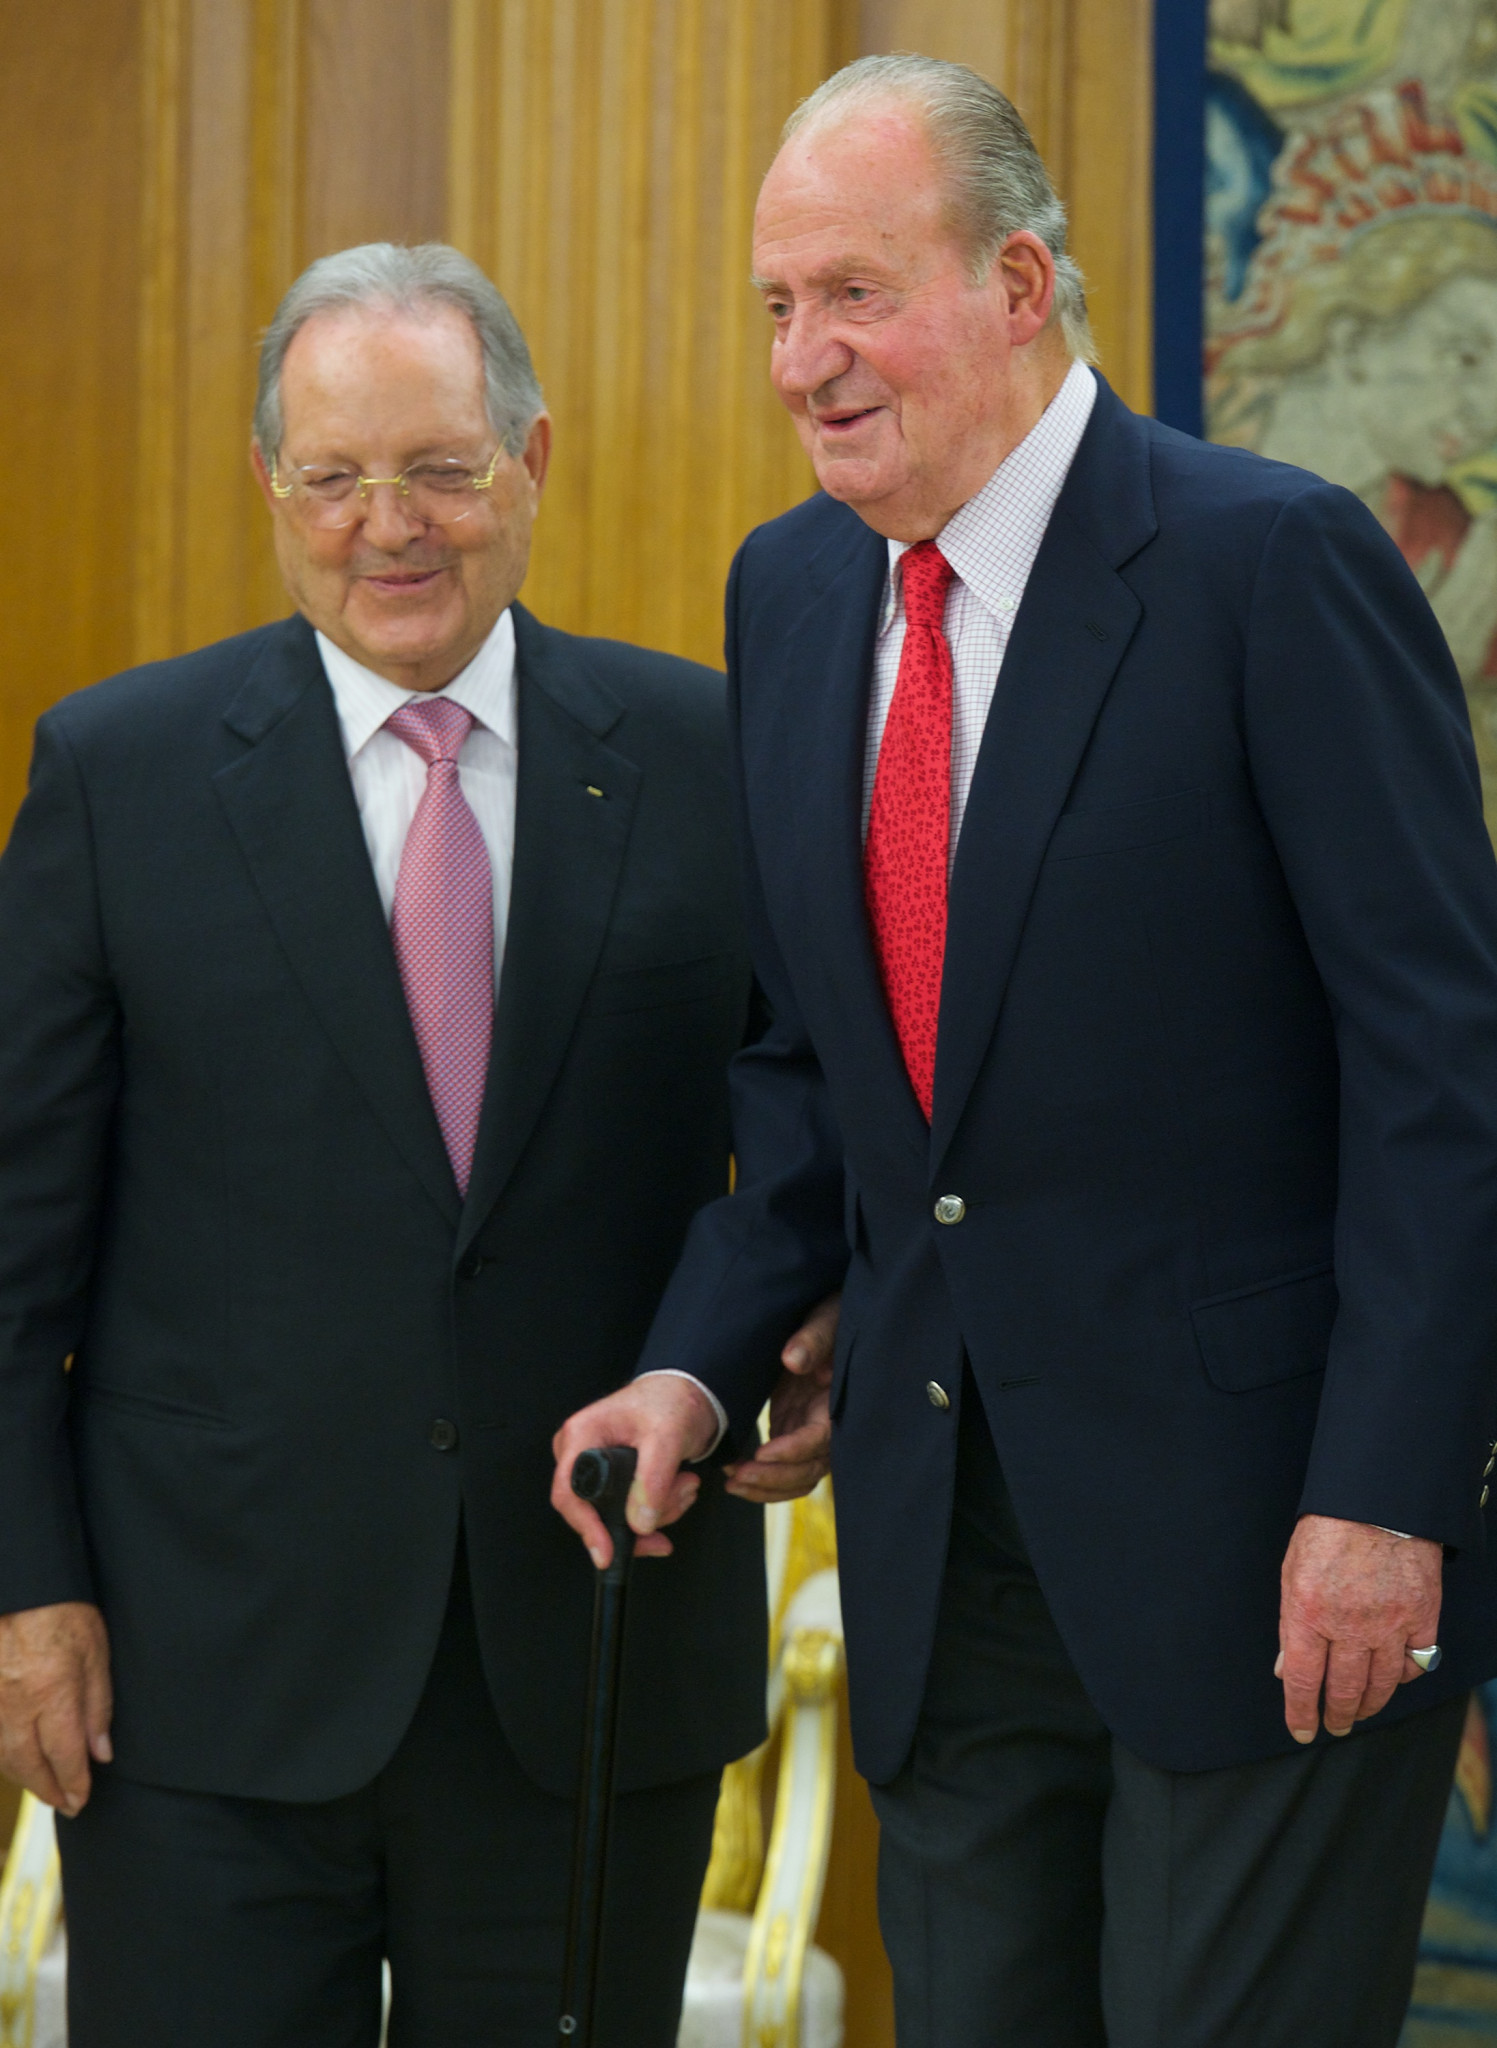 Olegario Vázquez Raña, pictured here with Juan Carlos I of Spain, has been President of the ISSF for 38 years ©Getty Images